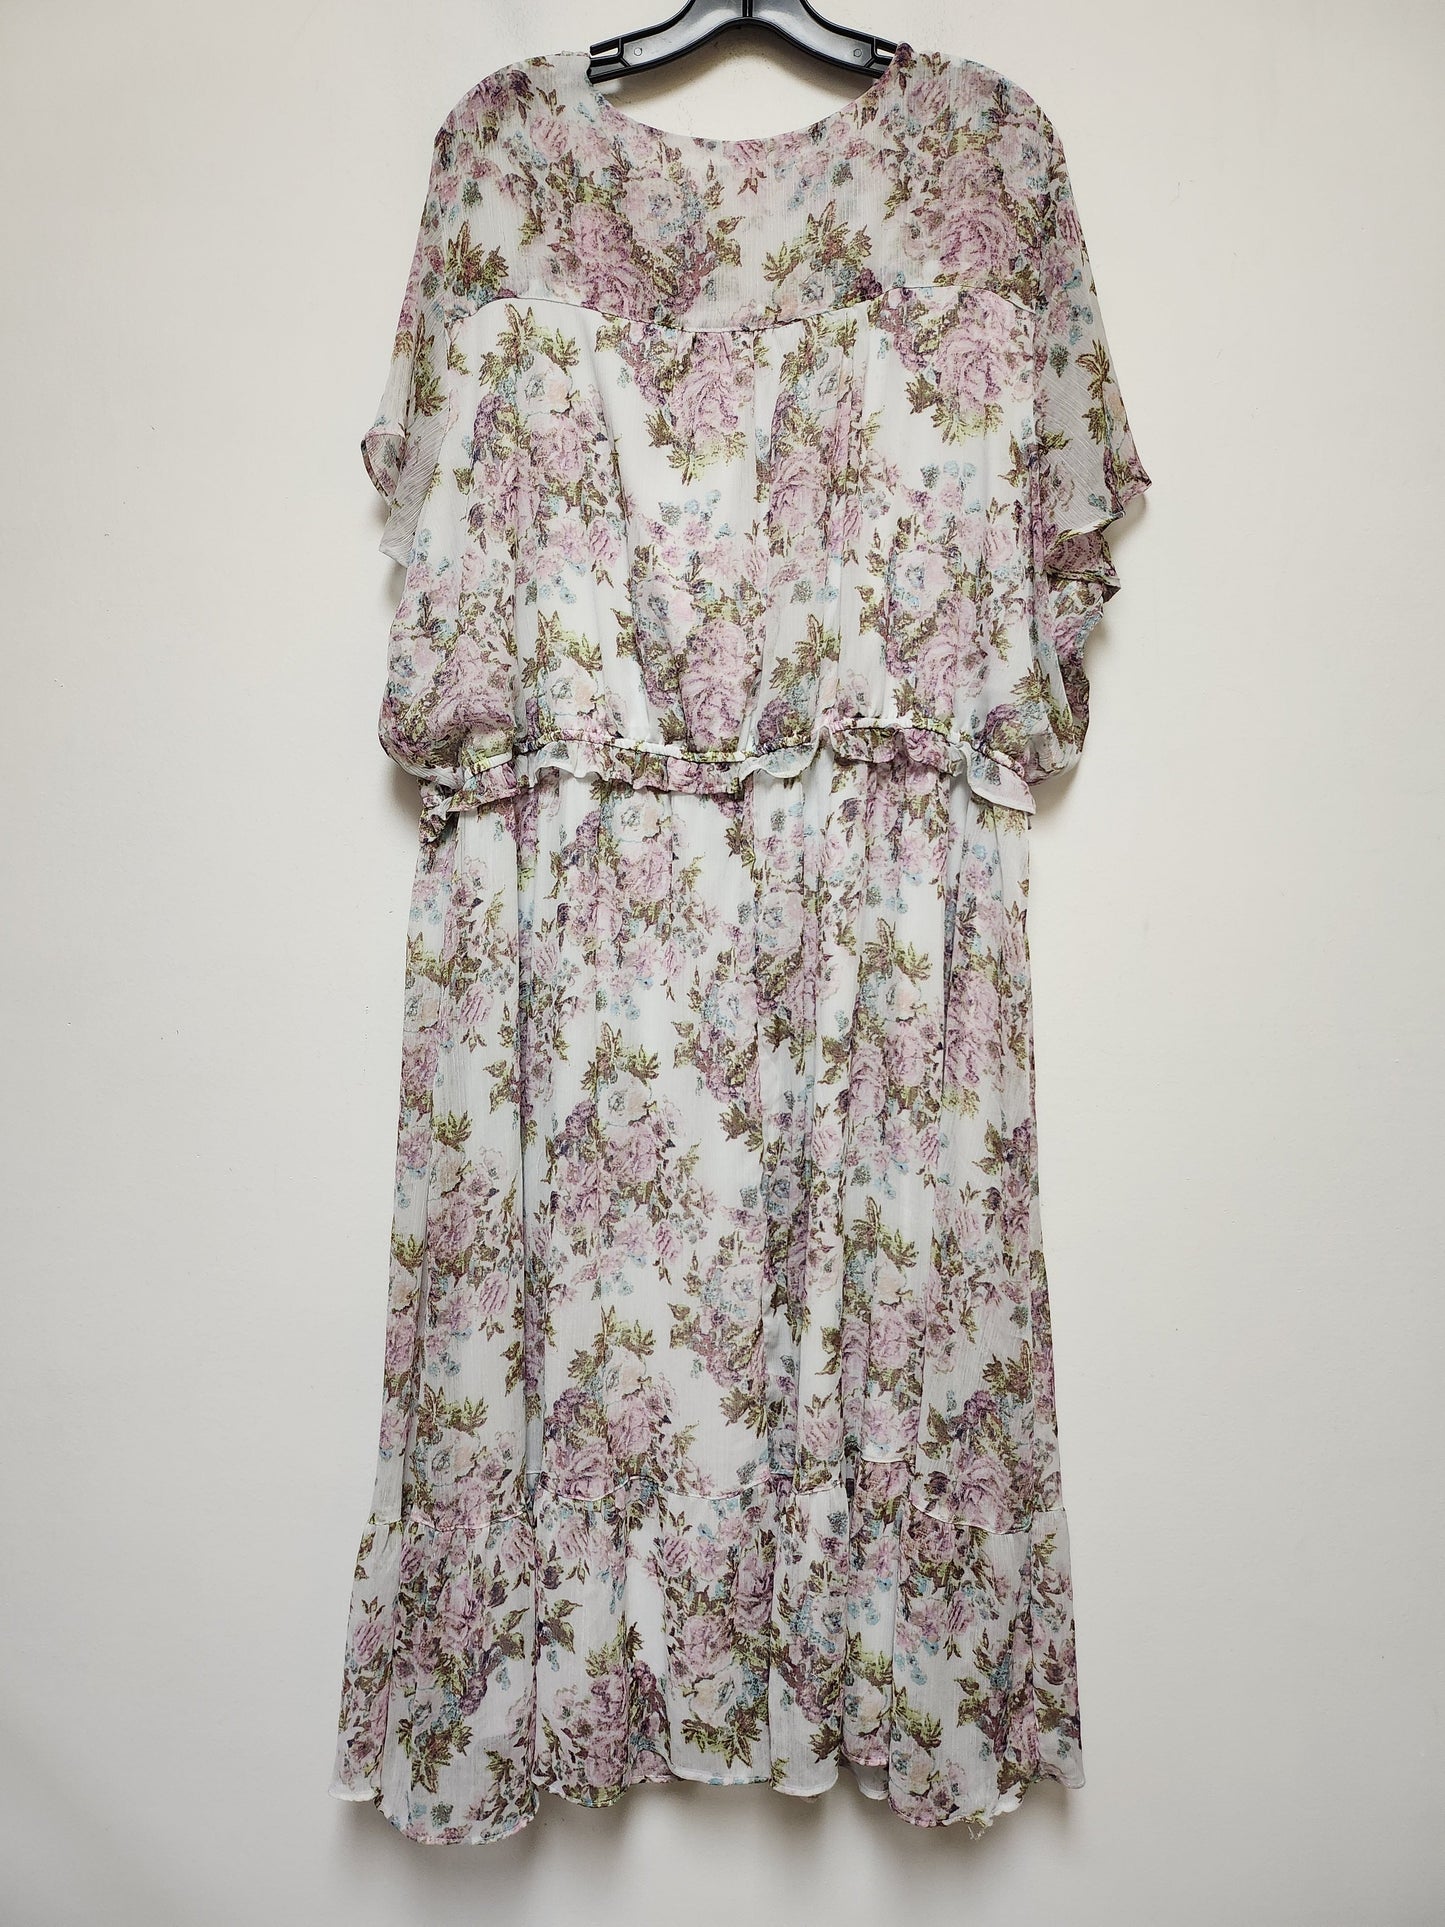 Dress Casual Maxi By Lc Lauren Conrad  Size: 3x